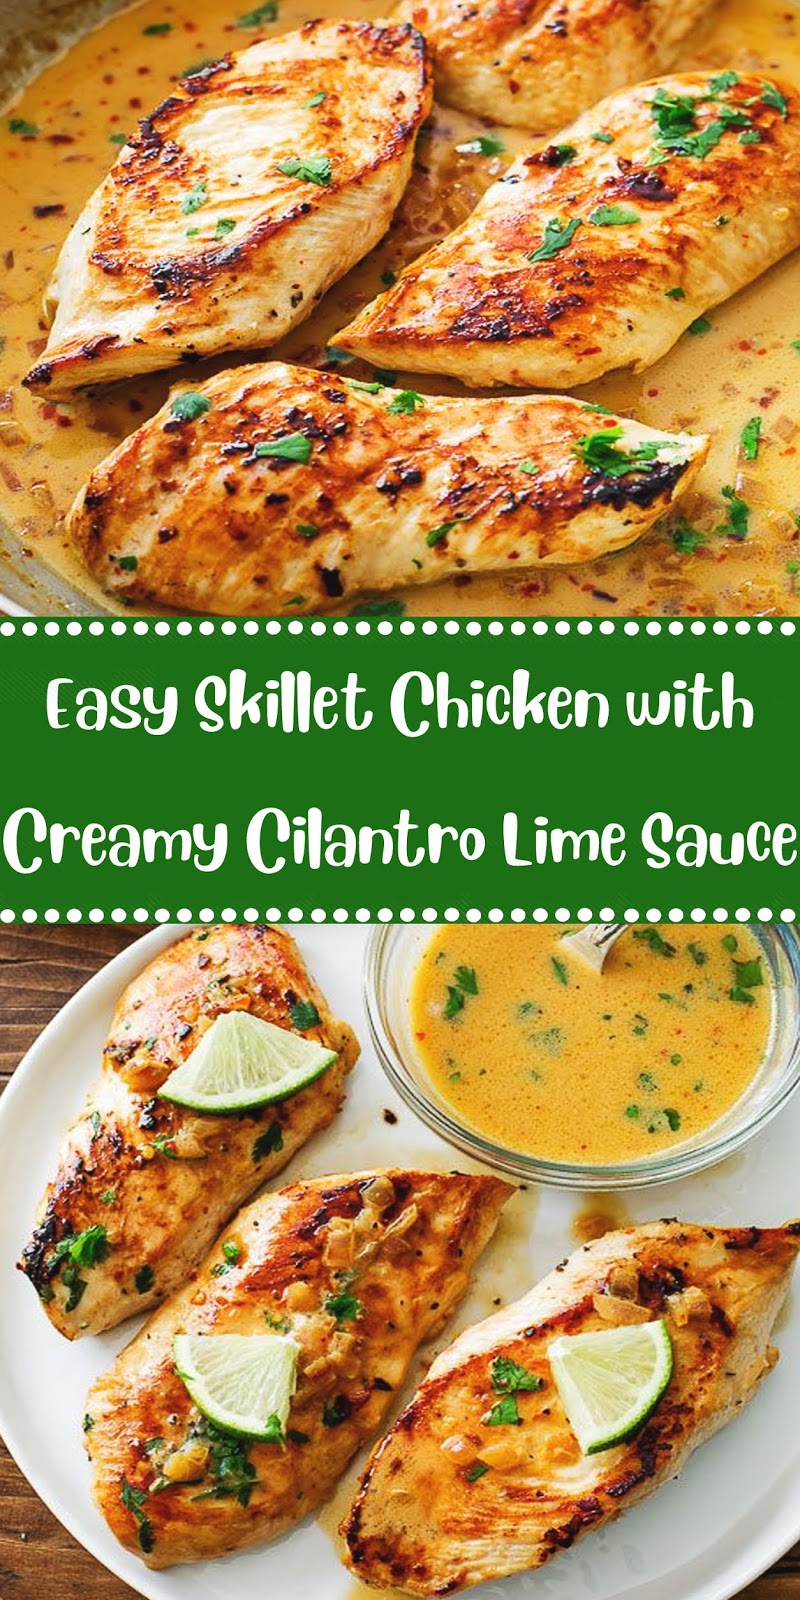 Easy Skillet Chicken With Creamy Cilantro Lime Sauce